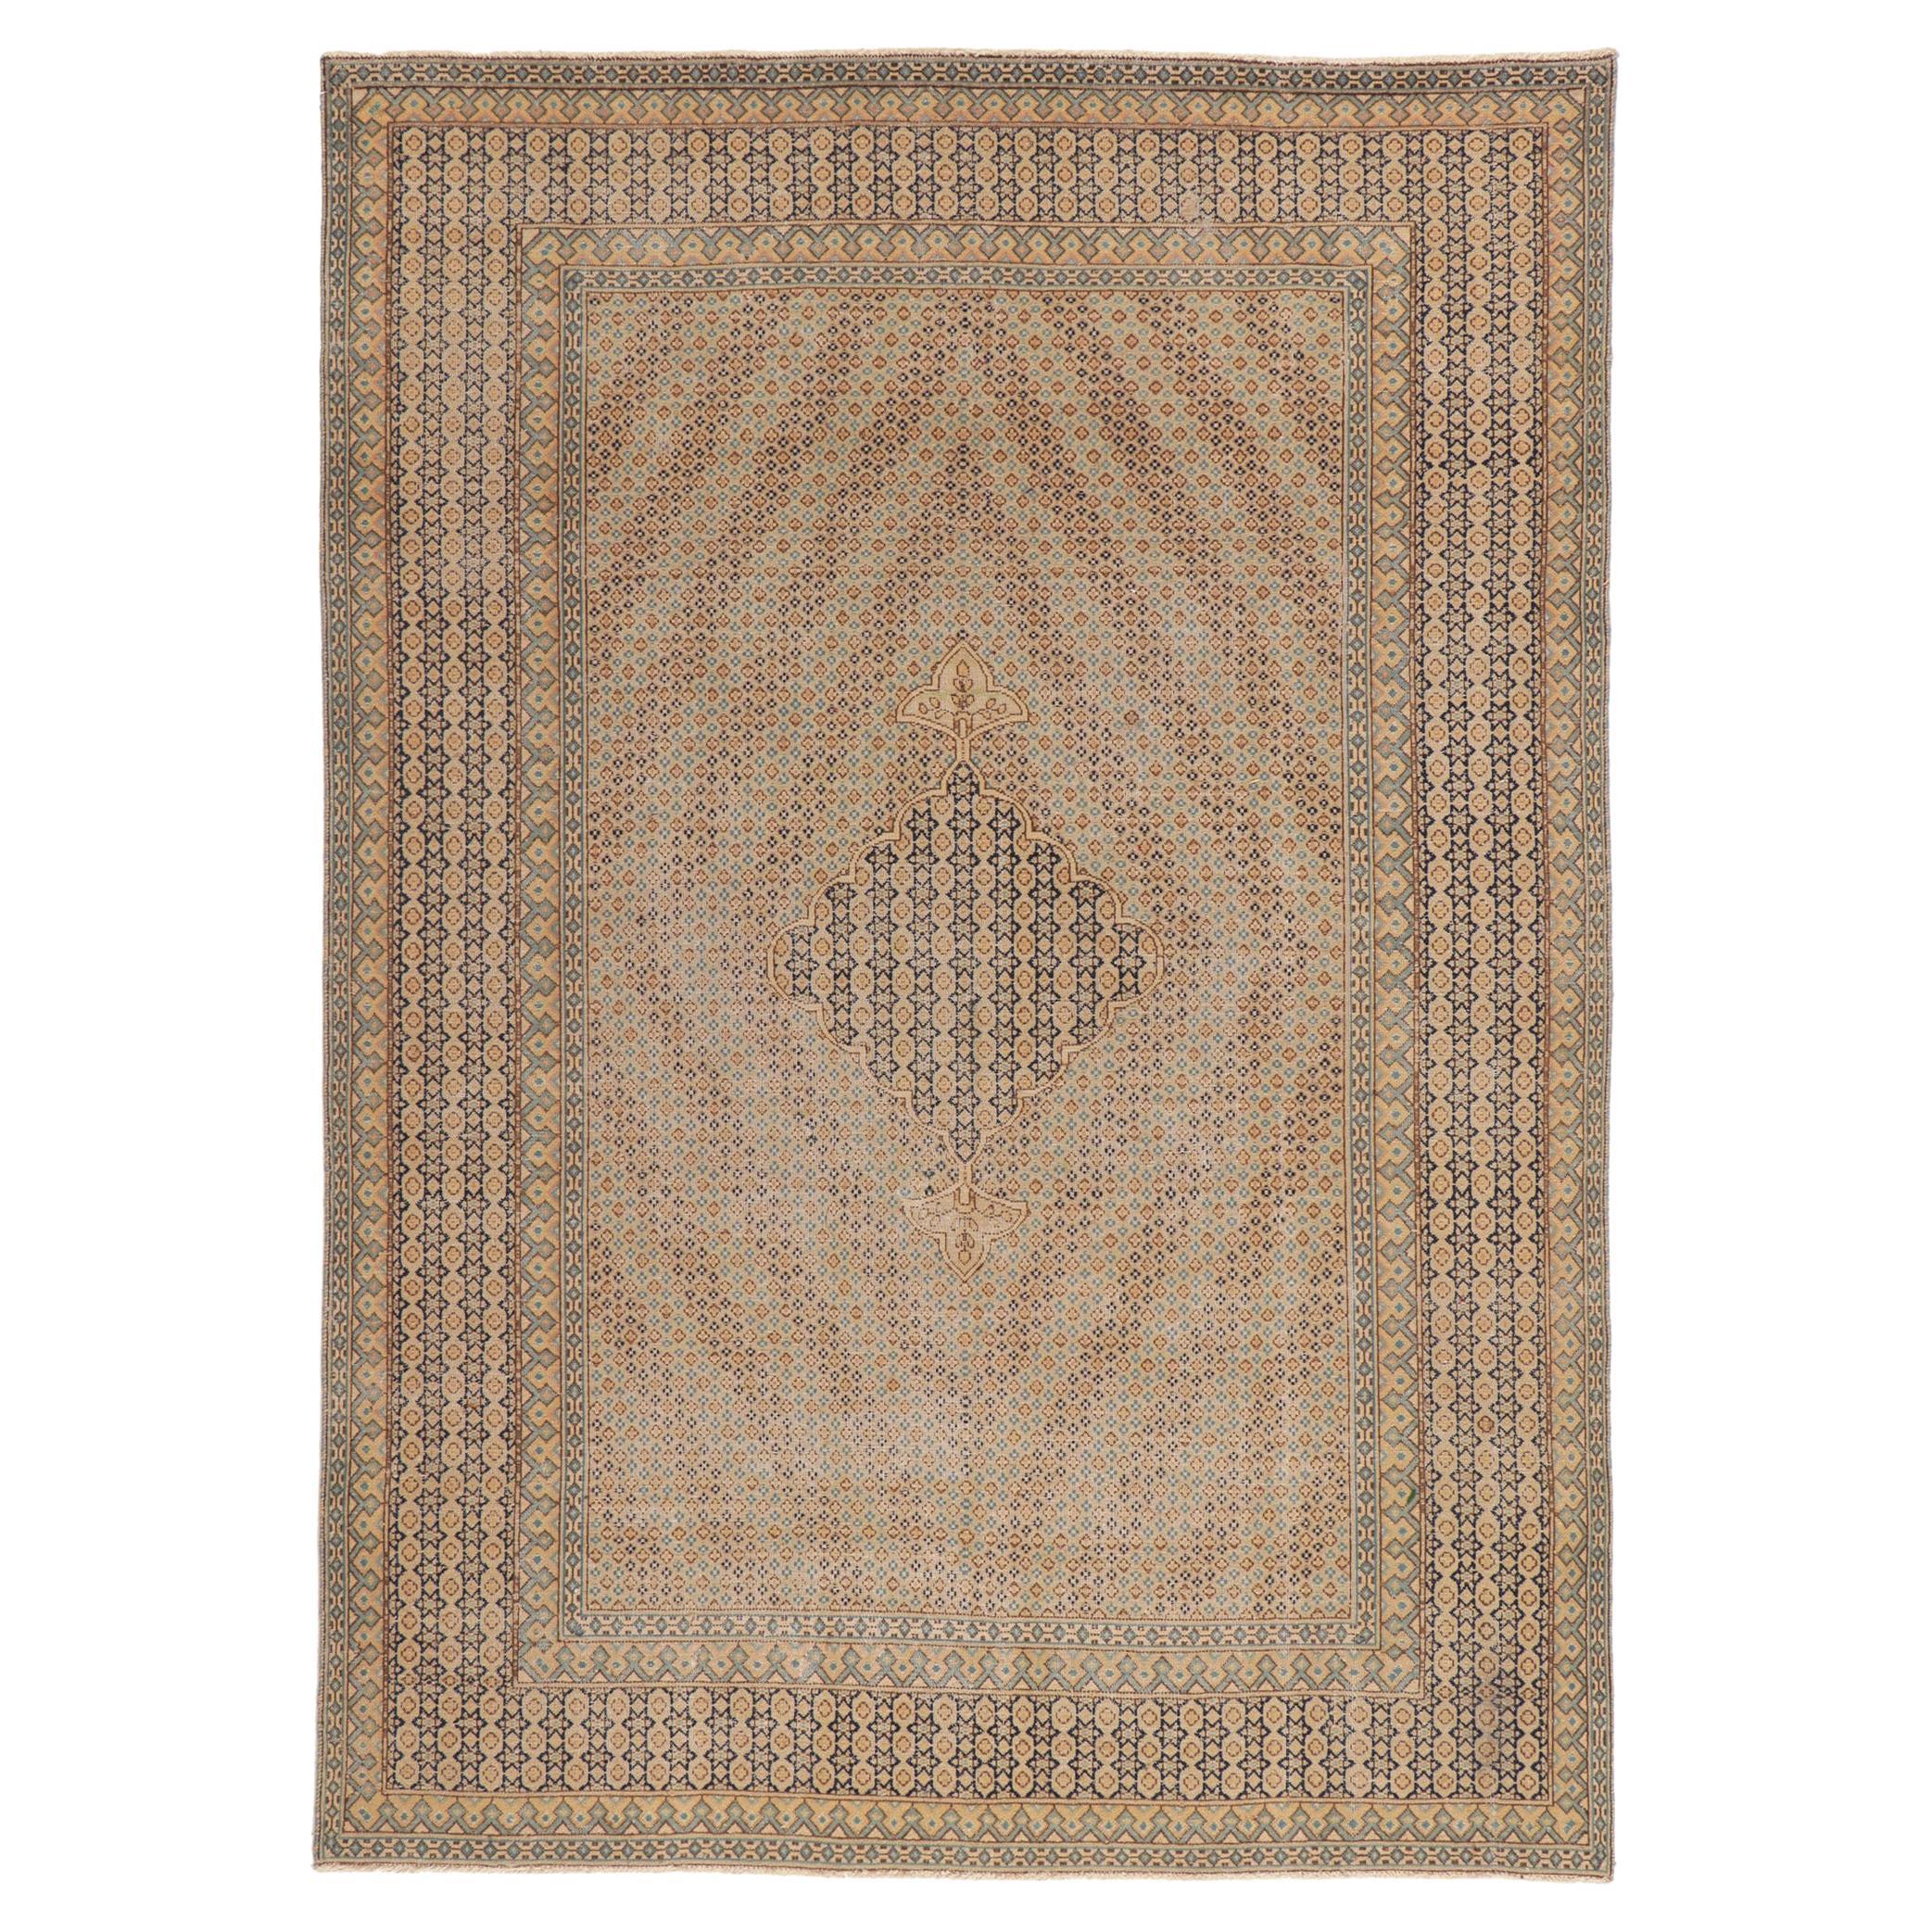 Vintage Persian Kerman Rug, Relaxed Refinement Meets Soothing Sophistication